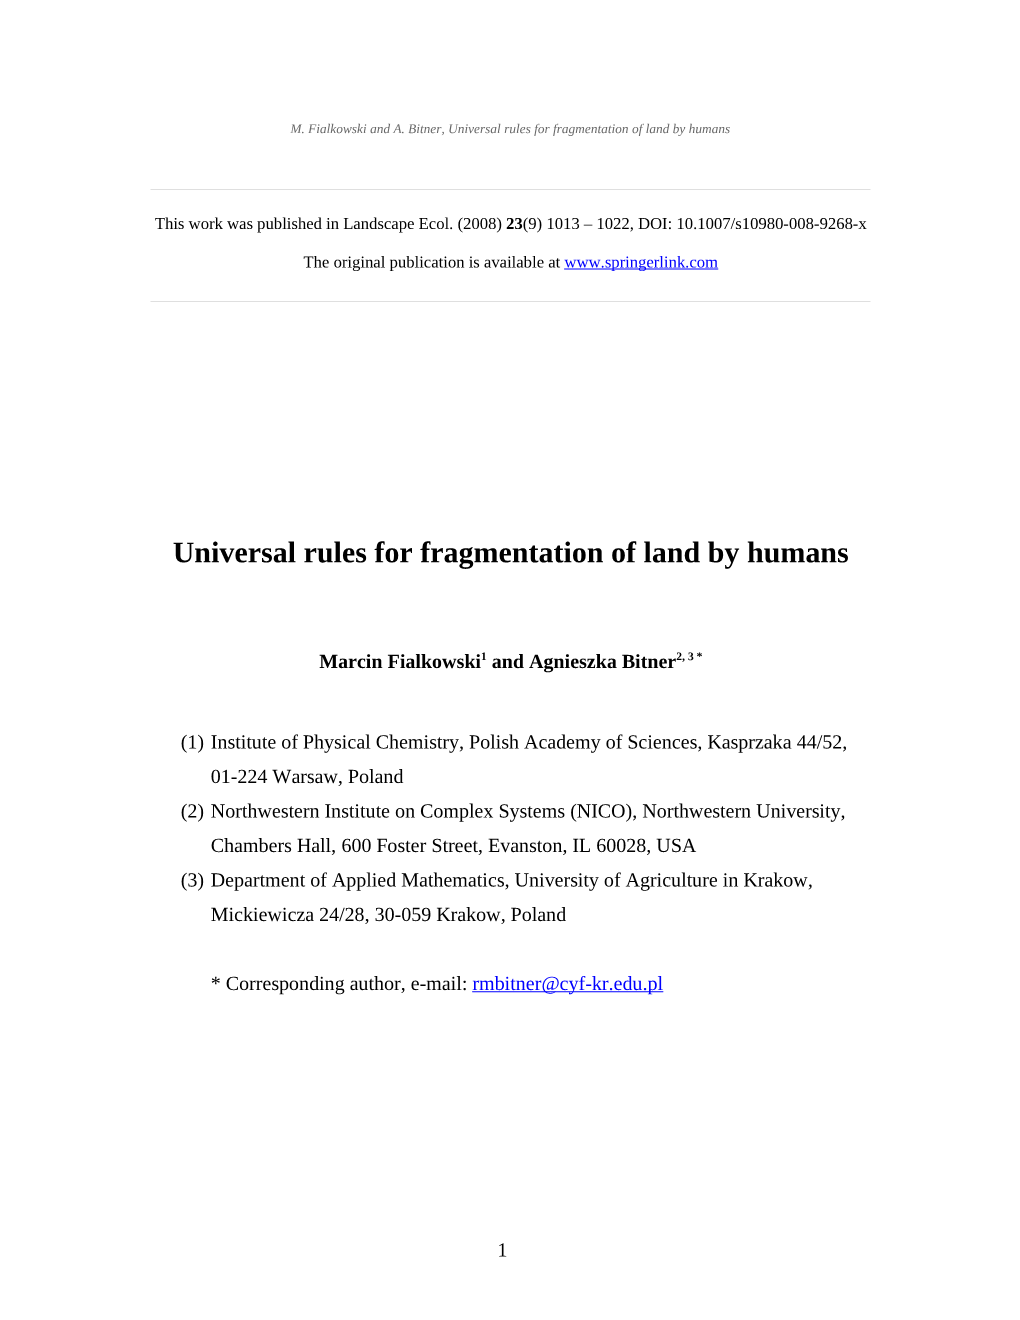 Universal Rules for Fragmentation of Land by Humans